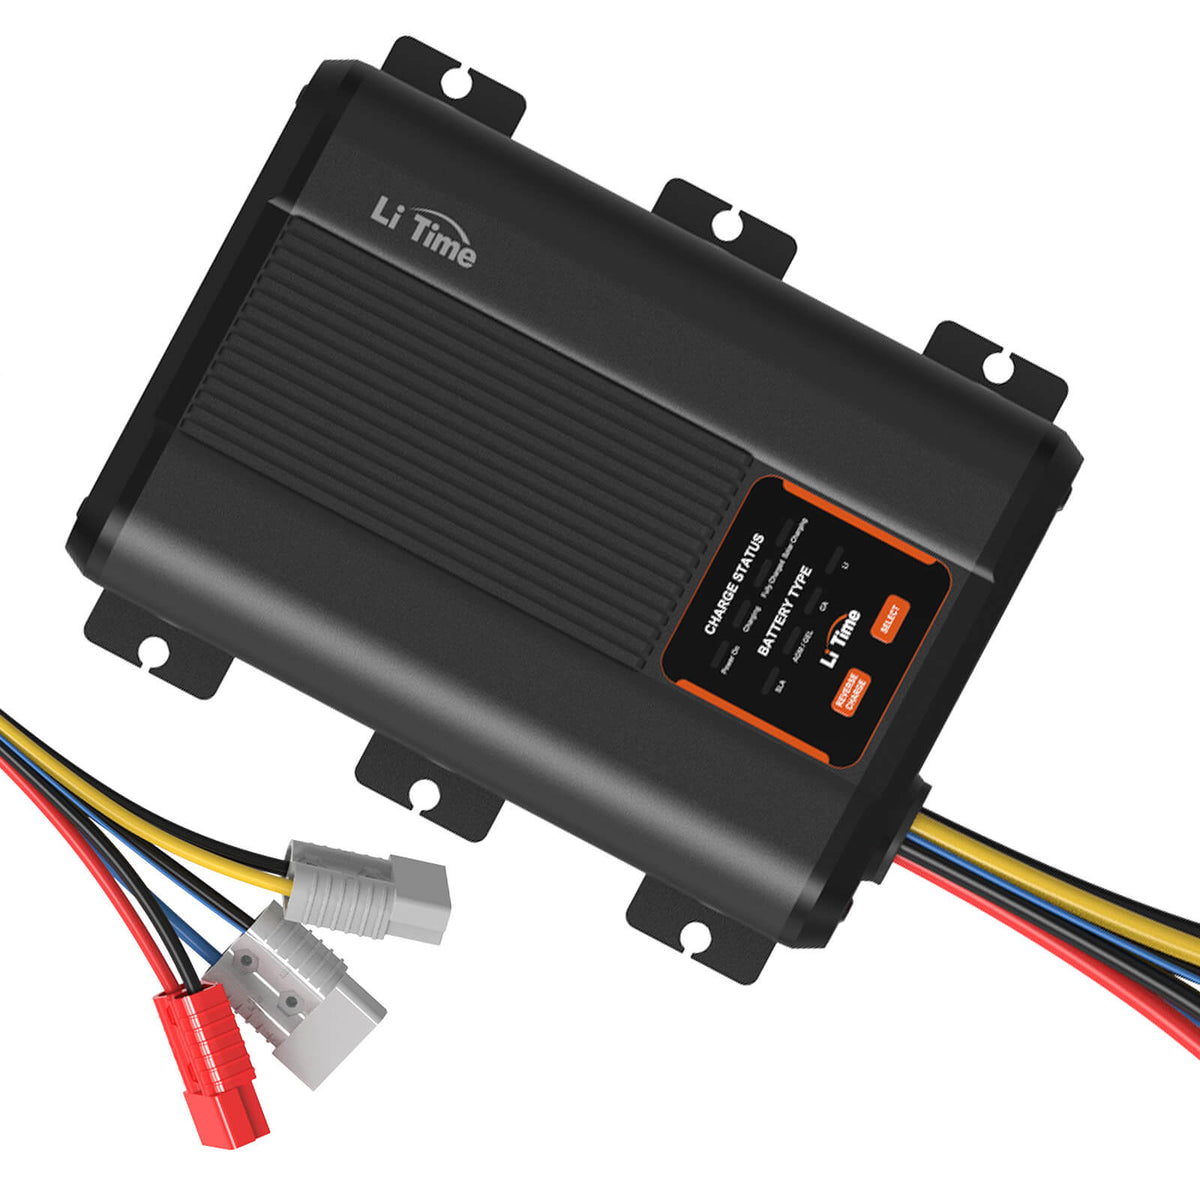 LiTime 12V 40A DC to DC battery charger with MPPT for 12V LiFePO4, lead-acid, SLA, gel, AGM and calcium batteries